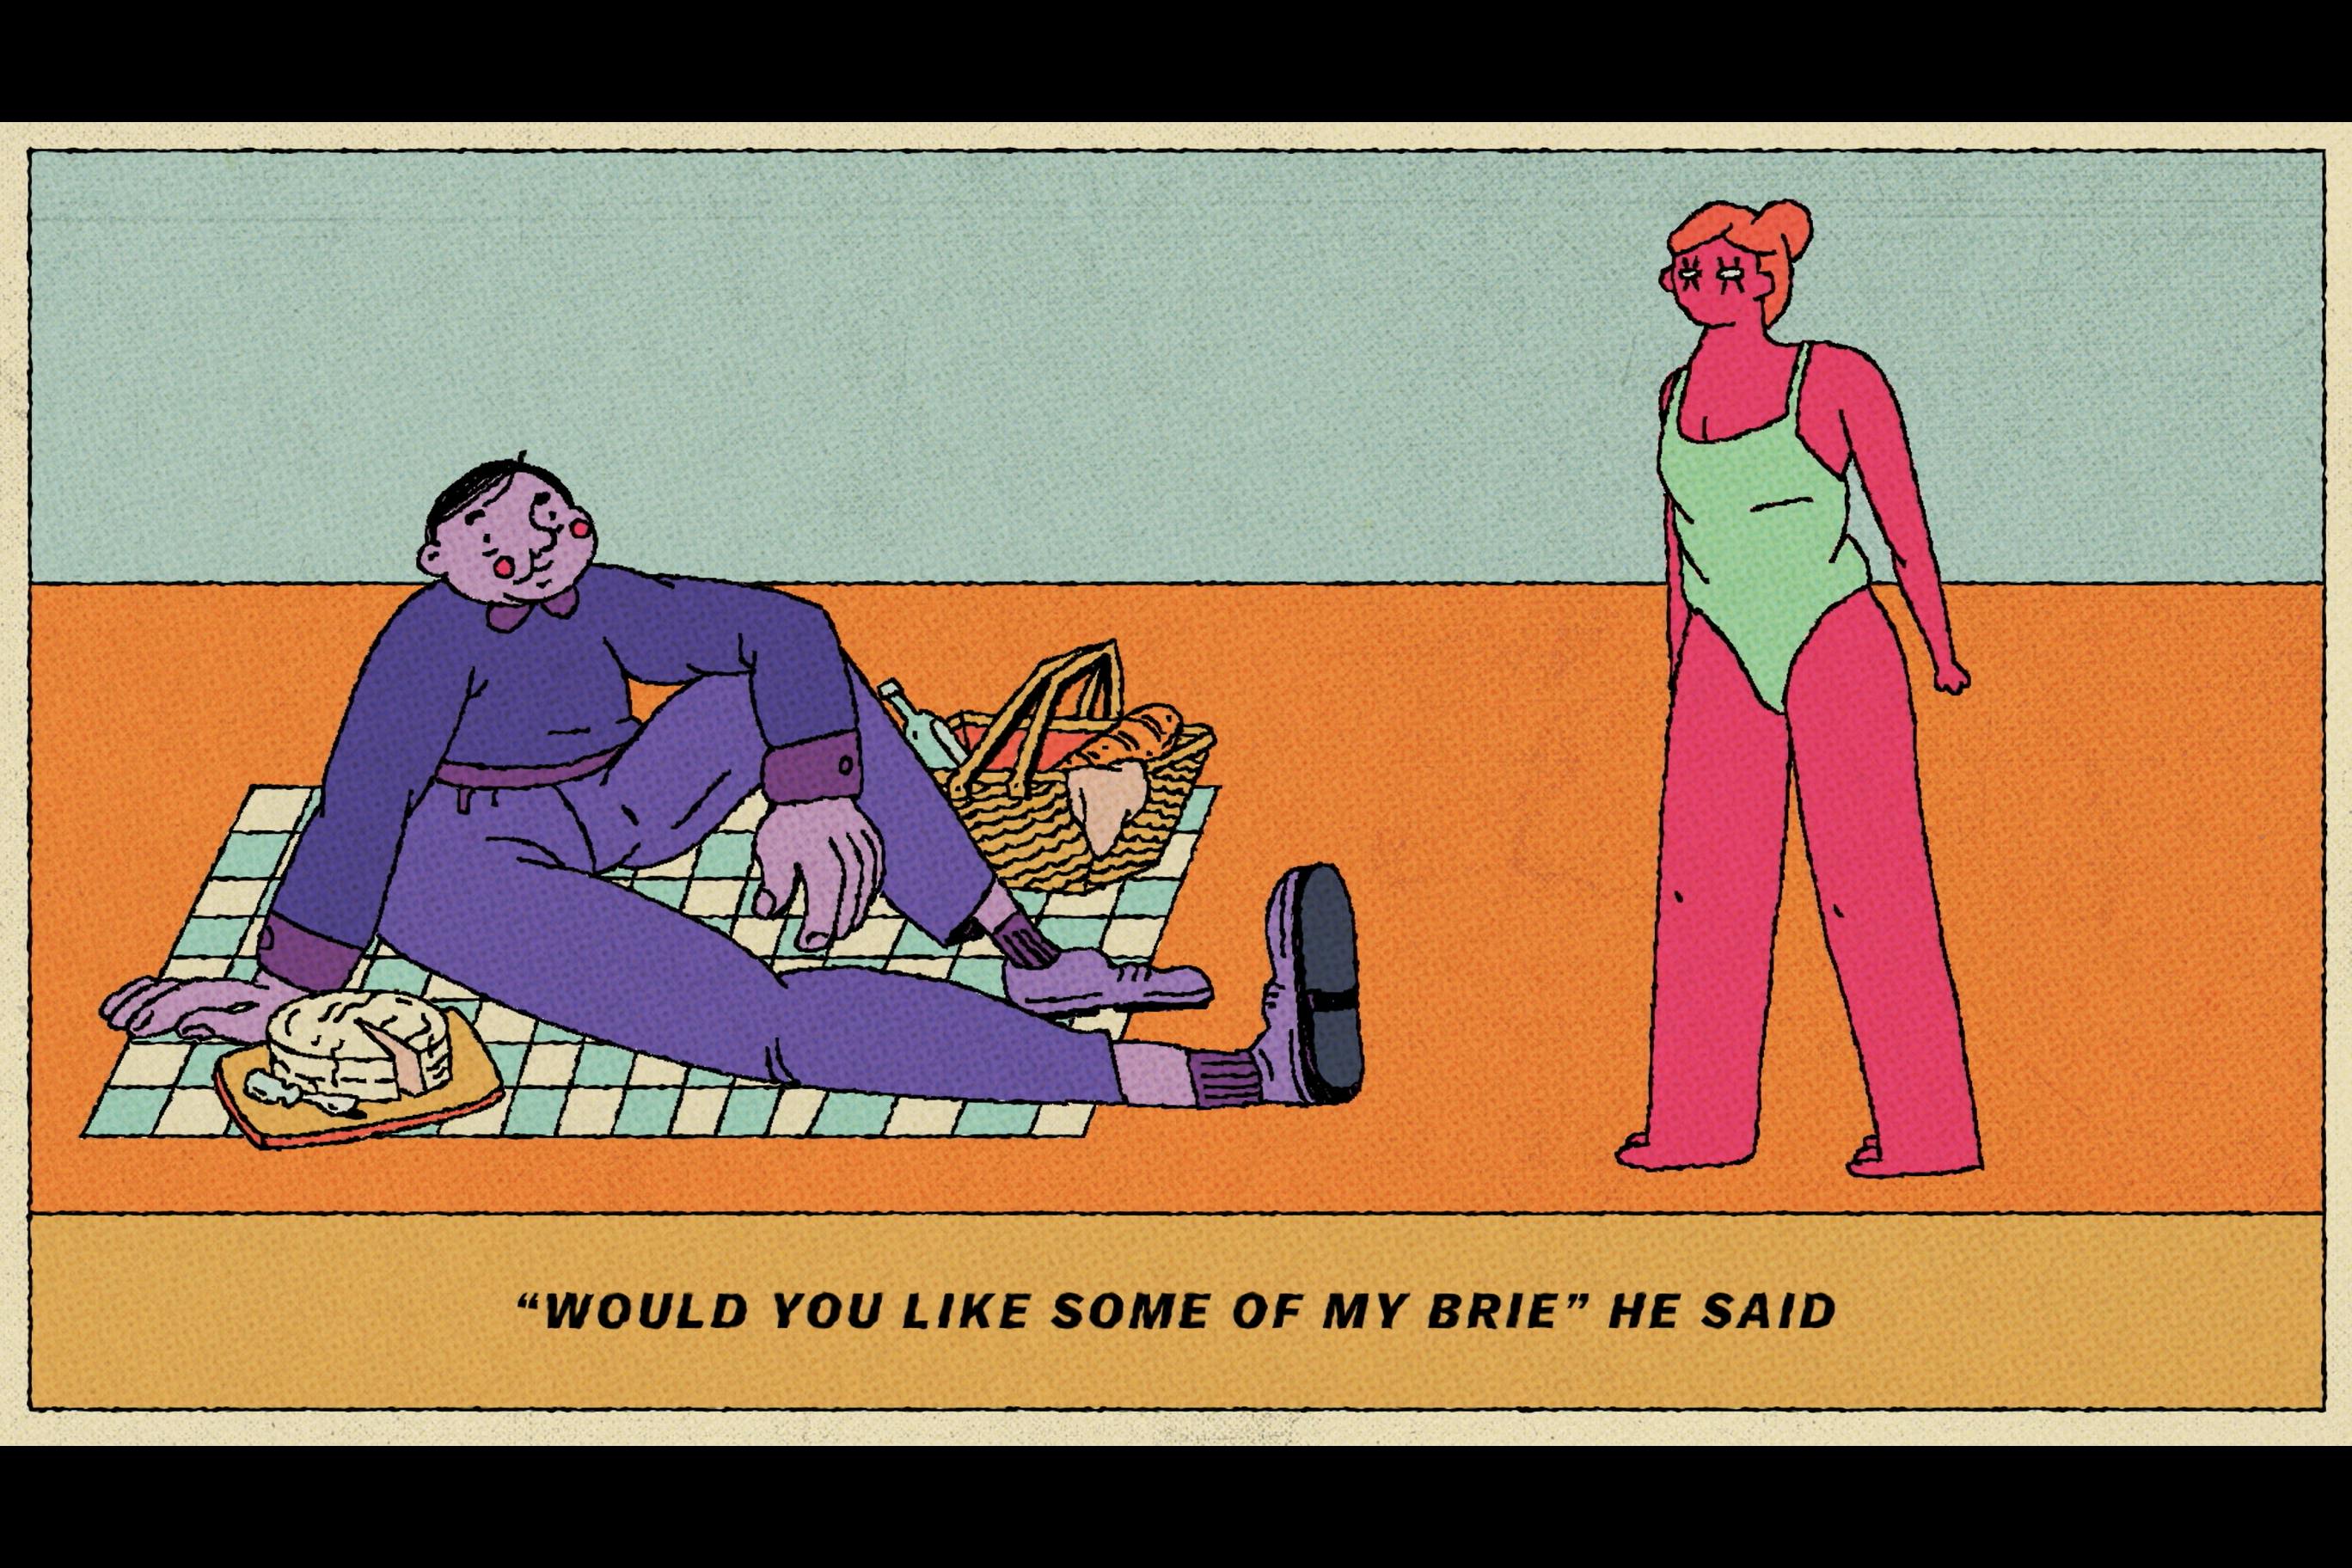 Illustration of two people. One, a purple man earin ga long sleeve shirt and rosy cheeks sitting on a picnic blanket and looking at a woman with orange hair, pink skin, and wearing a light green bathing suit. 
Below the figures is the text, "'Would you like some of my brie' he said" 